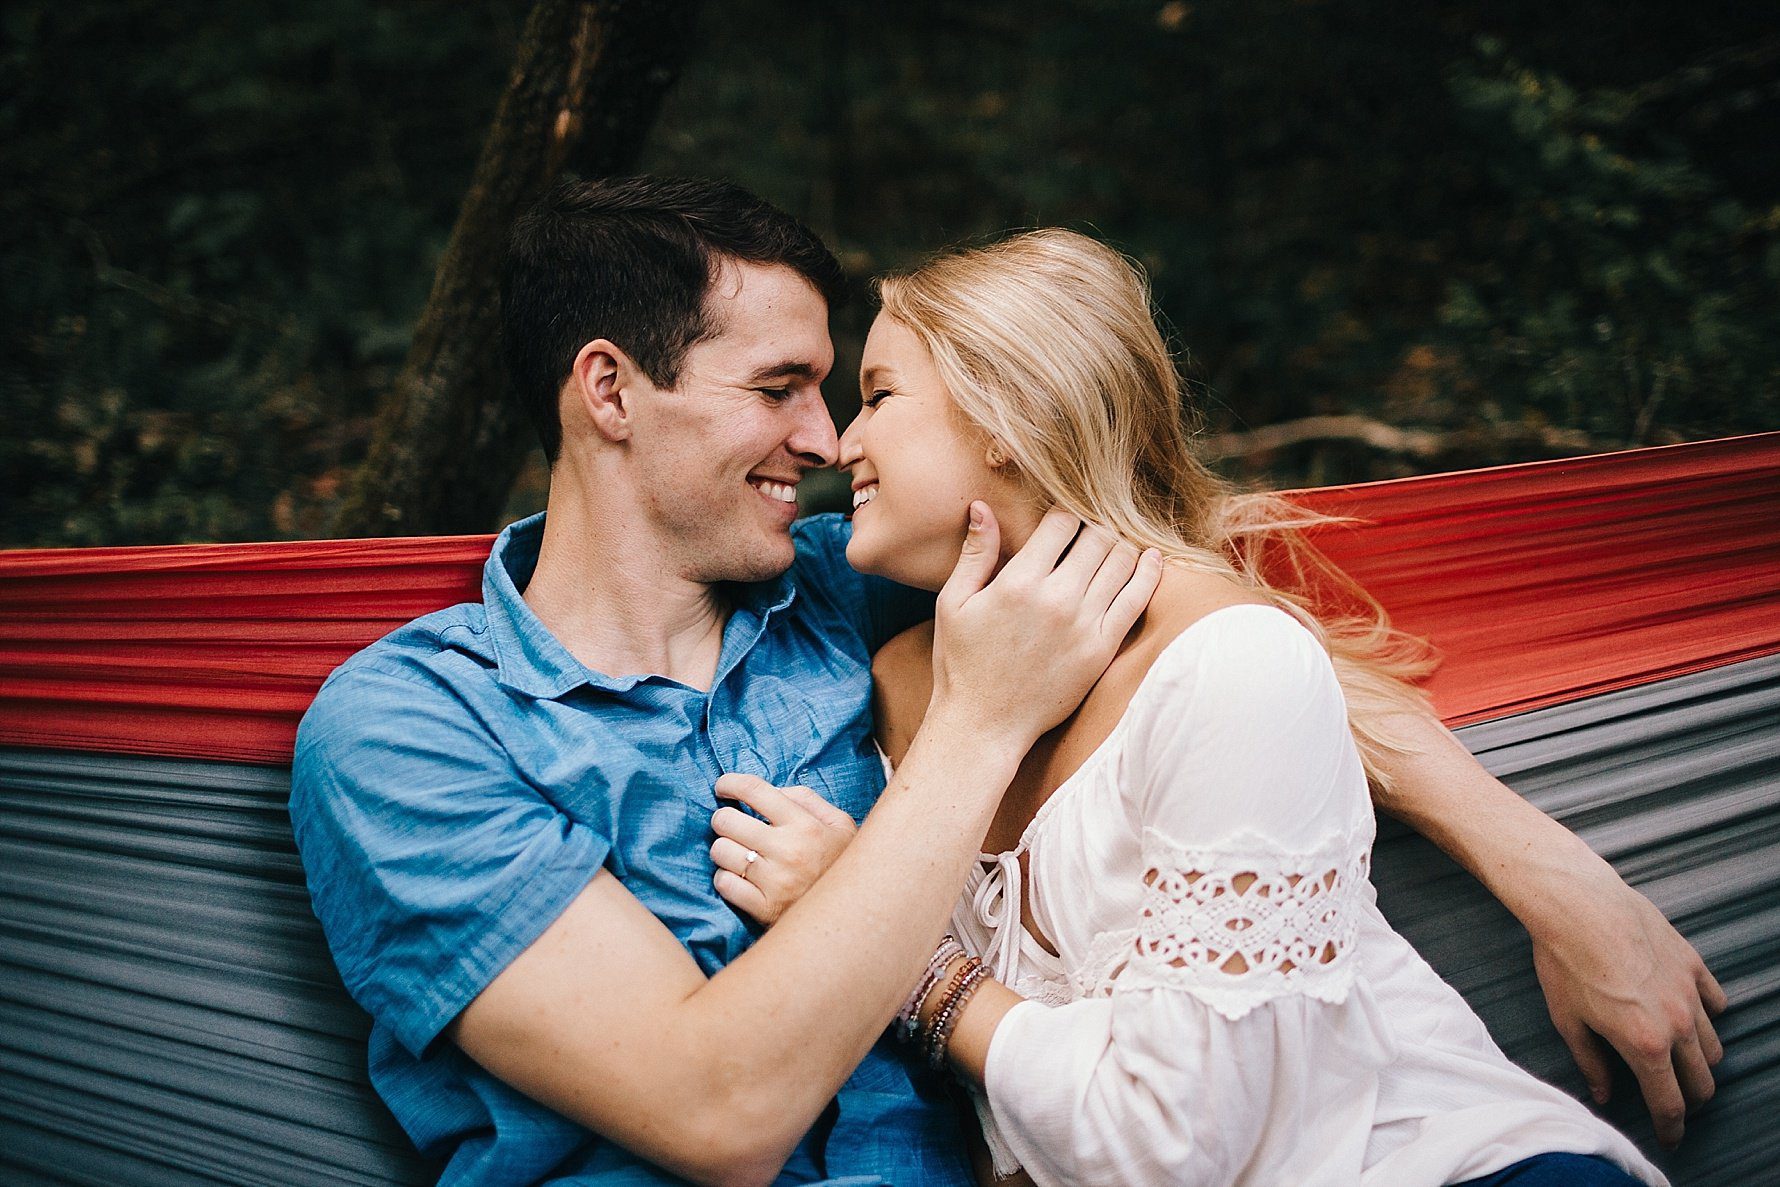 Engagement Photos in the Smoky Mountains | Erin Morrison Photography www.erinmorrisonphotography.com